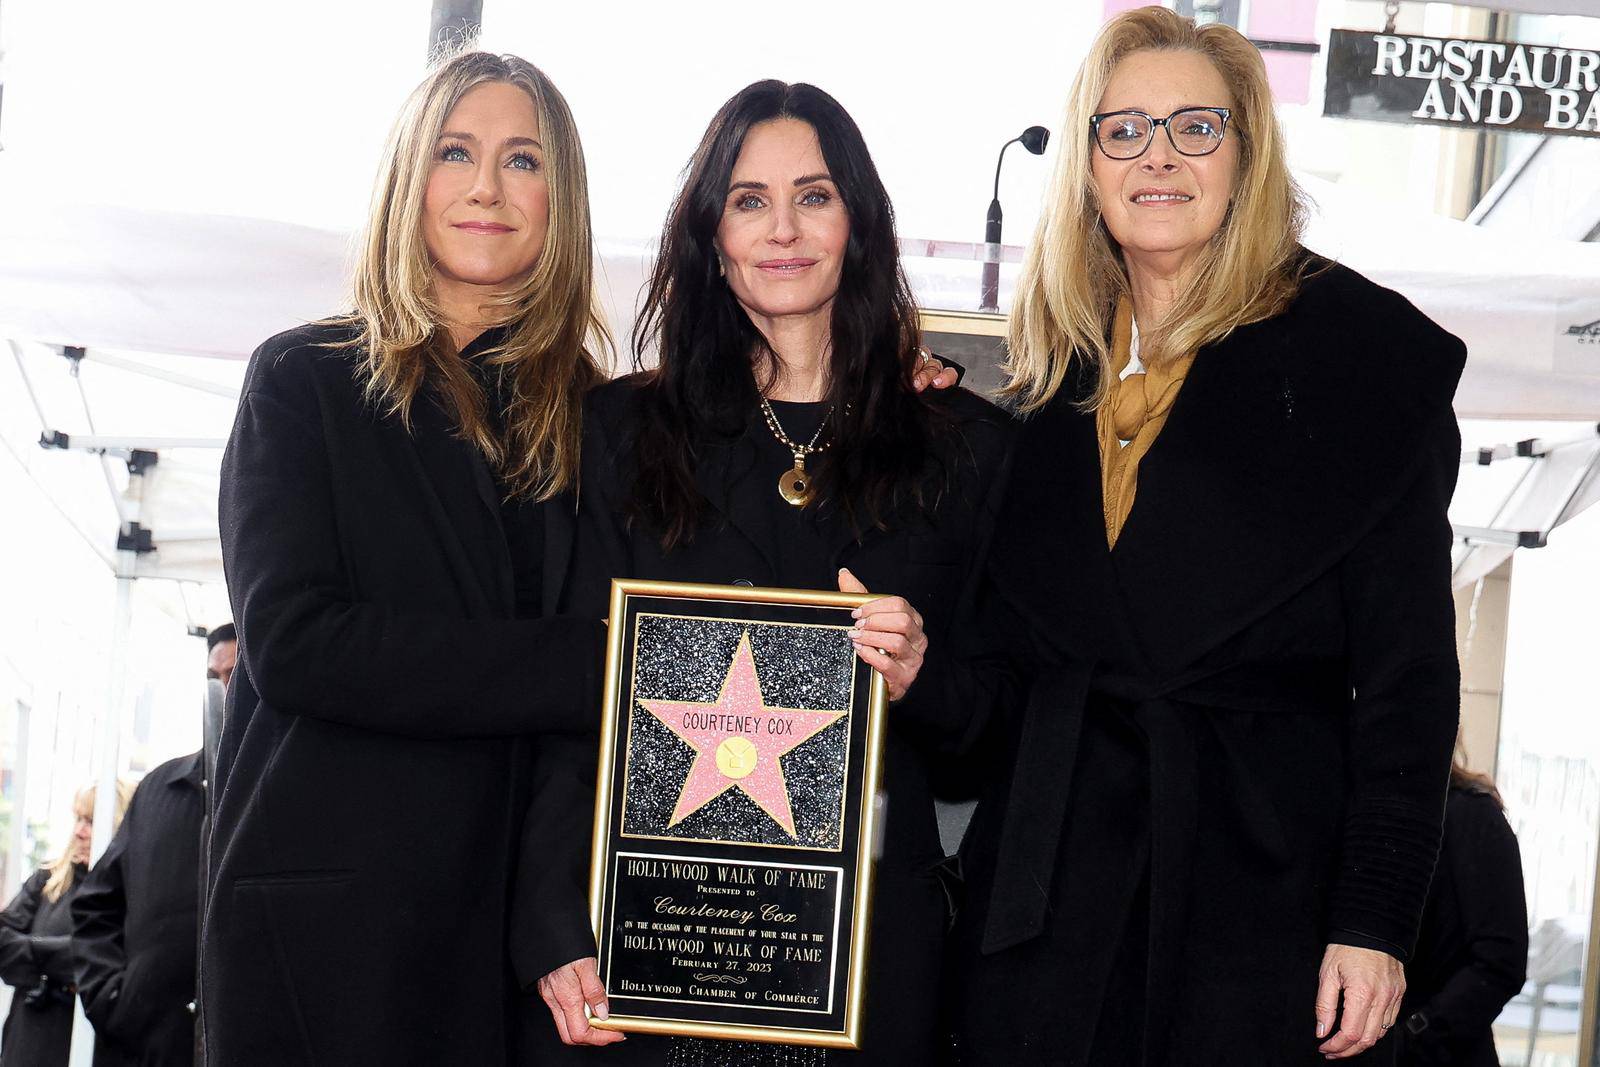 Actor Courteney Cox unveils her star on the Hollywood Walk of Fame in Los Angeles